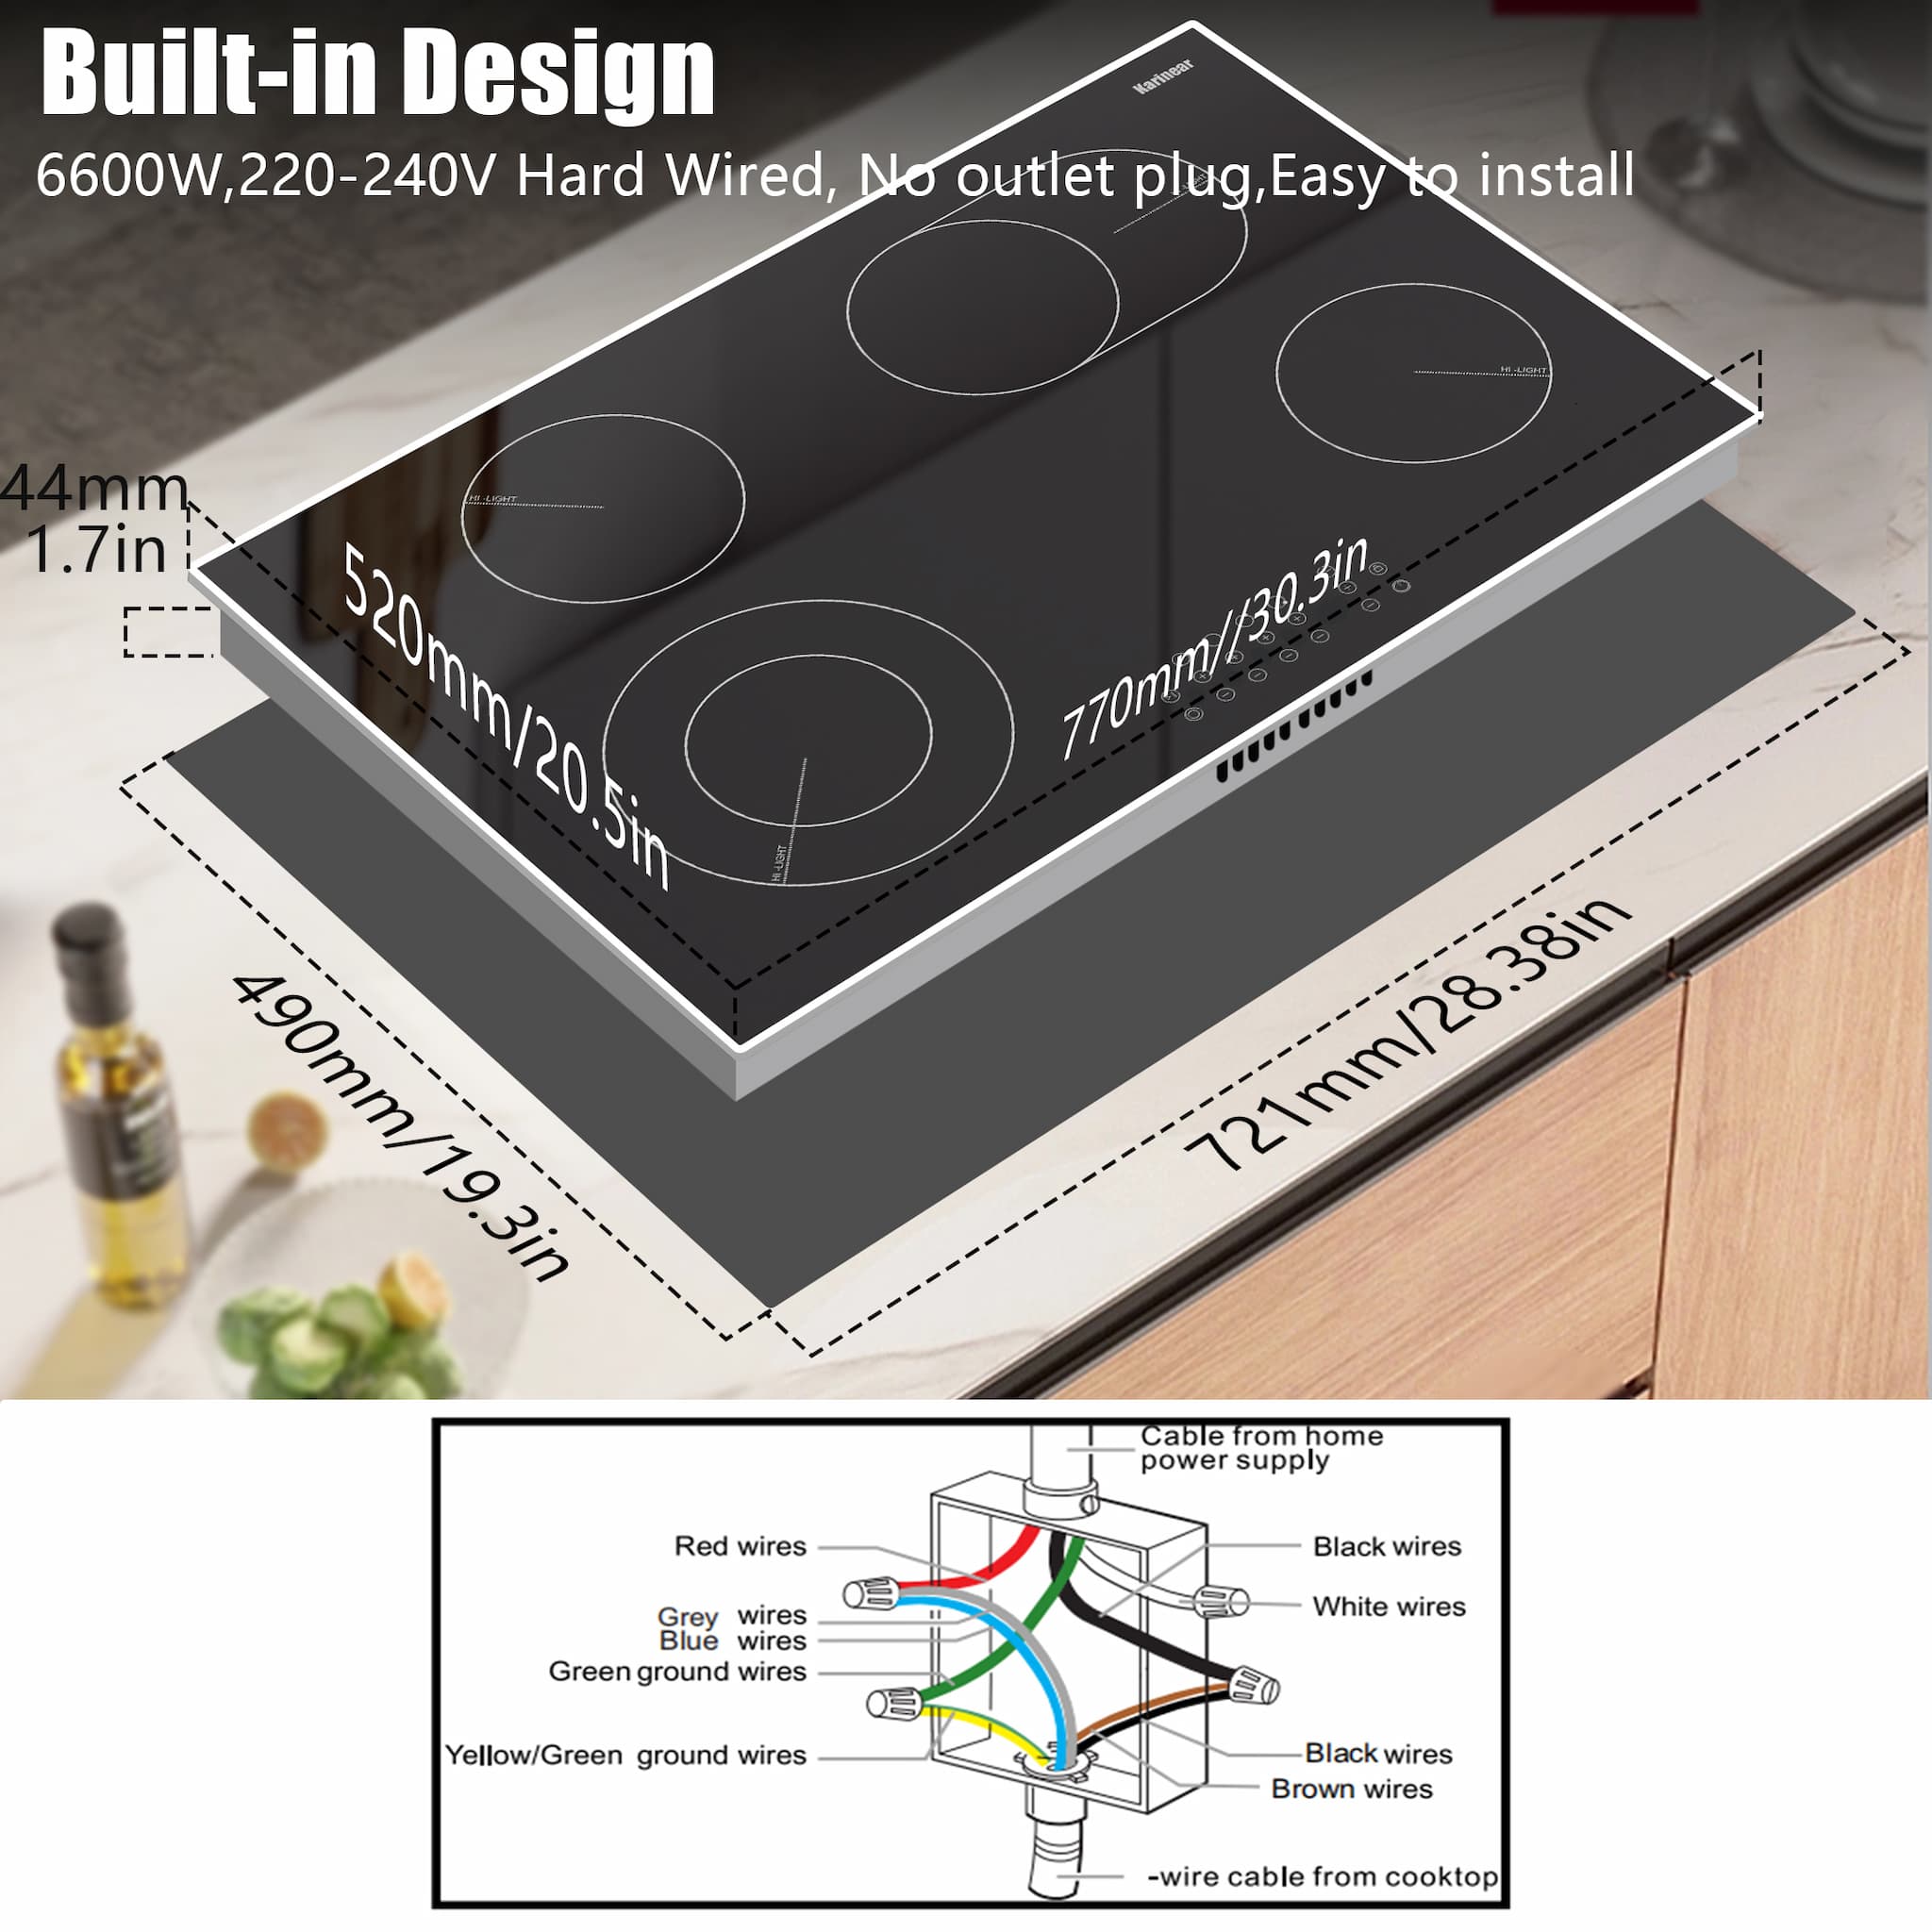 This 30'' electric stove is built-in design, which can save space and make your kitchen look more stylish and beautiful. Please recognize the size of the electric stove before you buy.